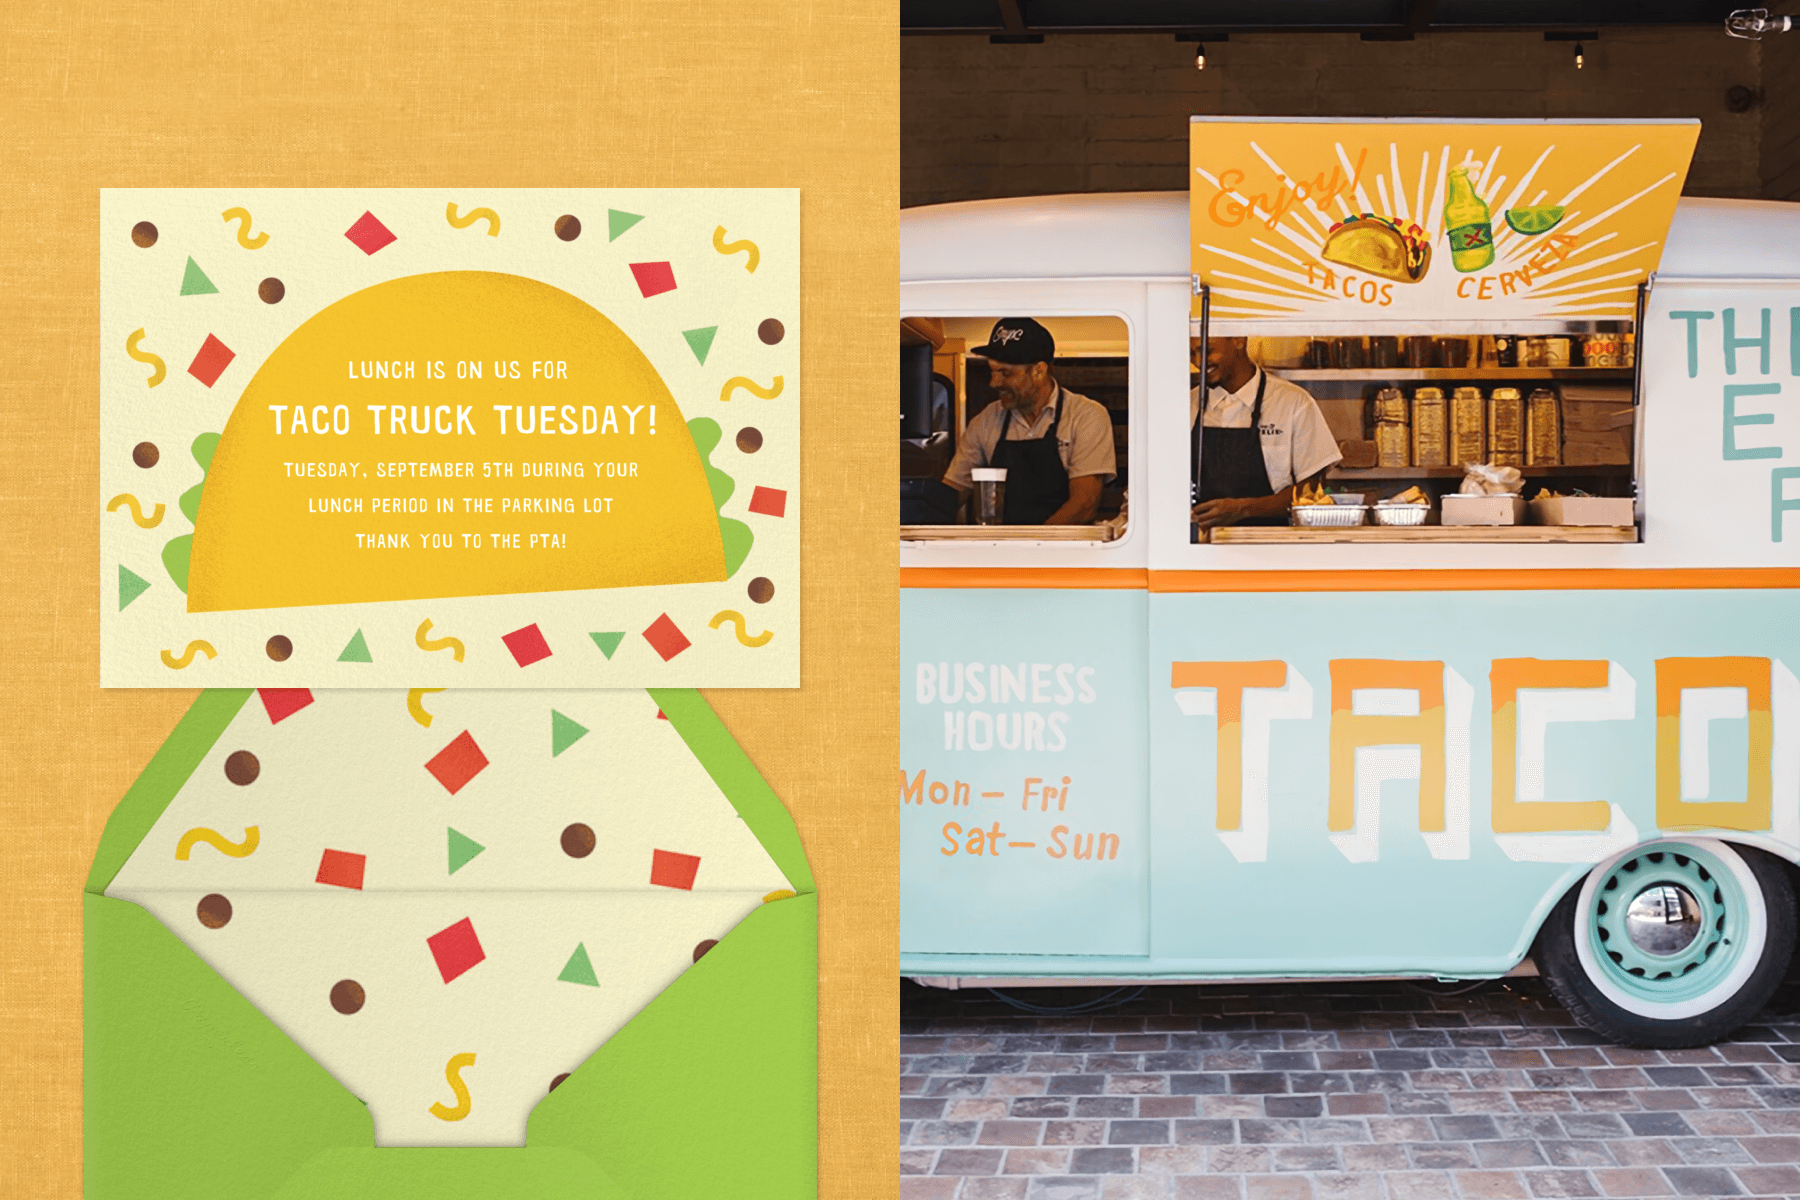 Left: A “taco truck Tuesday” invitation with an illustration of a yellow taco and simple shapes representing cheese, lettuce, tomatoes, and beans. Right: A vintage van repurposed as a taco truck.